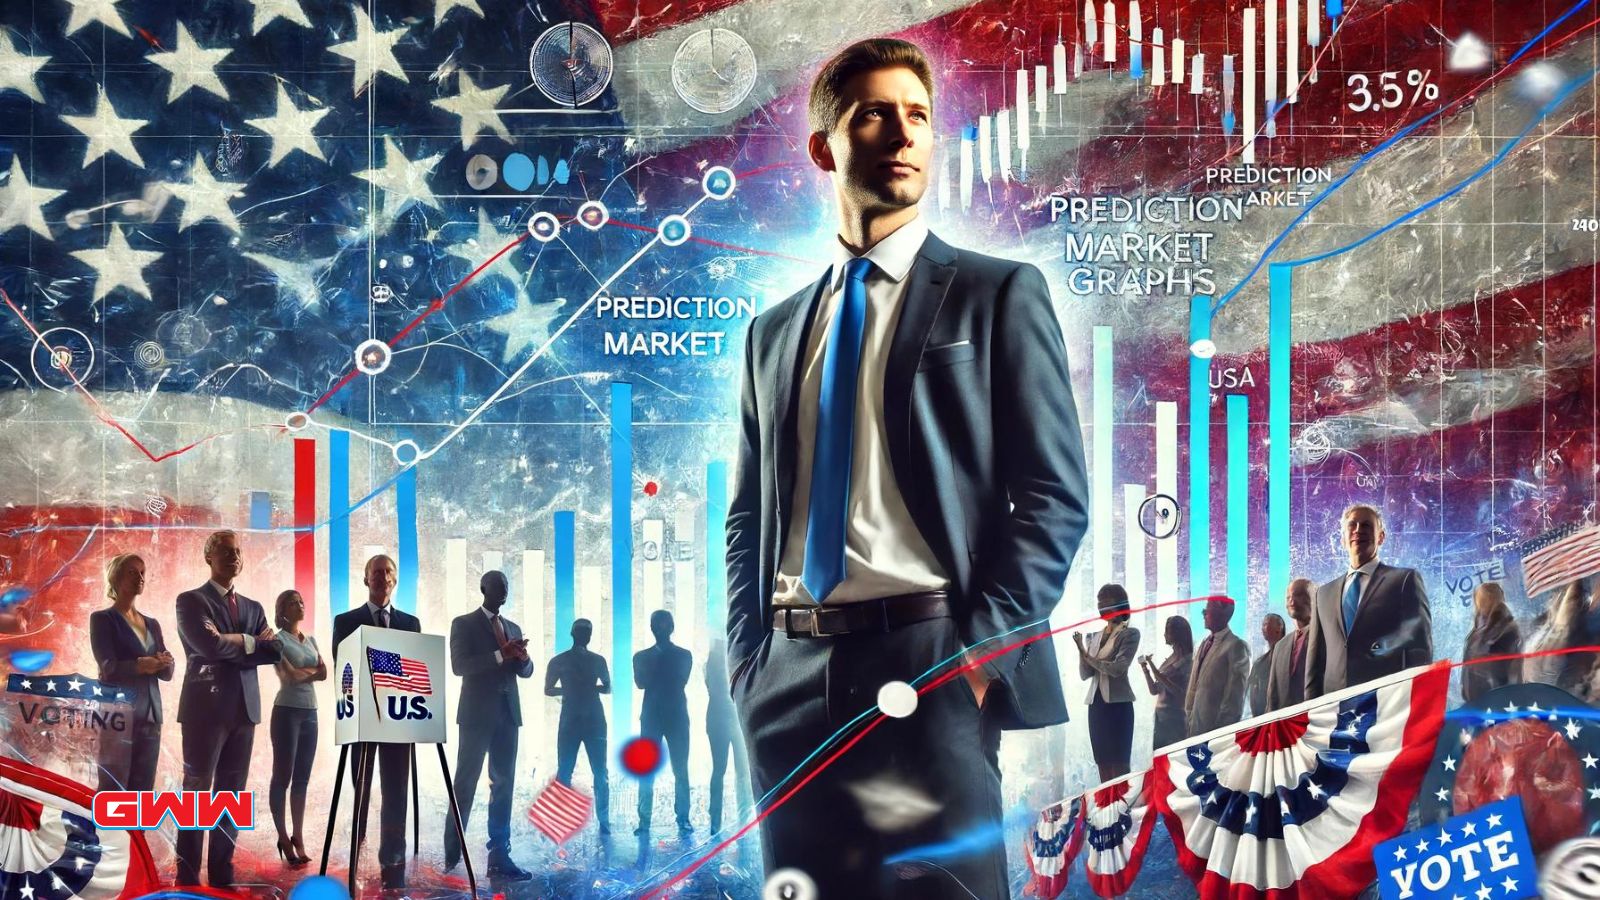 Businessman in front of USA flag with prediction market graphs and charts